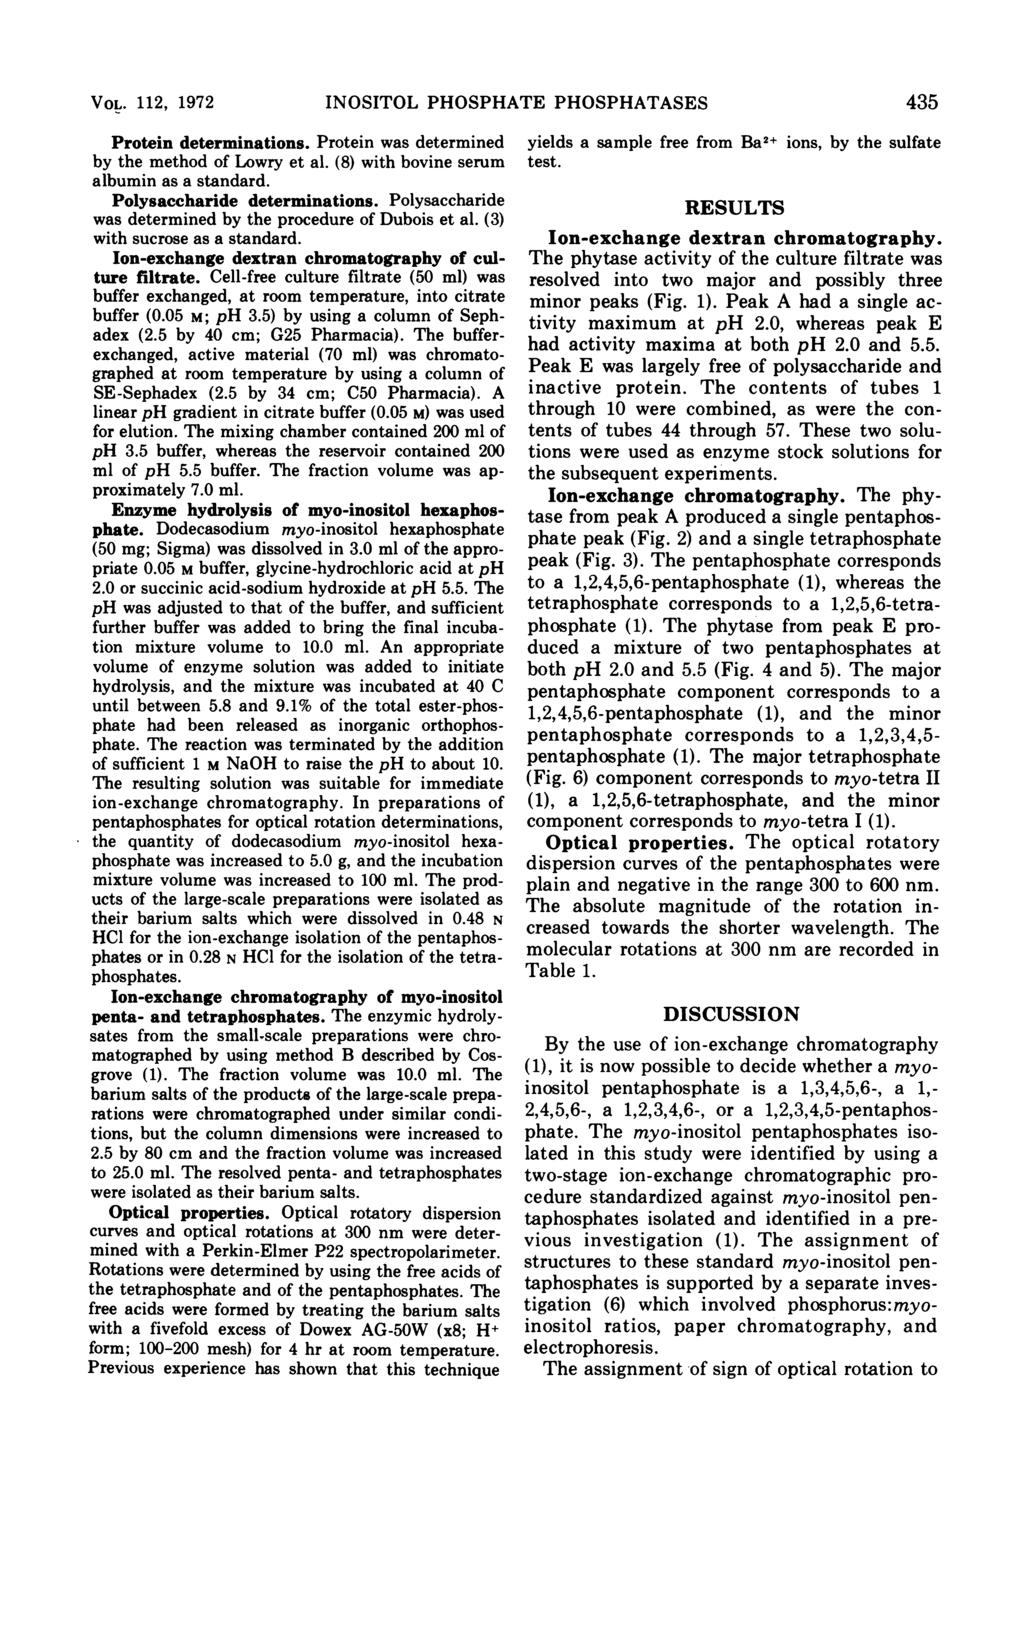 VOL. 112, 1972 INOSITOL PHOSPHATE PHOSPHATASES Protein determinations. Protein was determined by the method of Lowry et al. (8) with bovine serum albumin as a standard. Polysaccharide determinations.